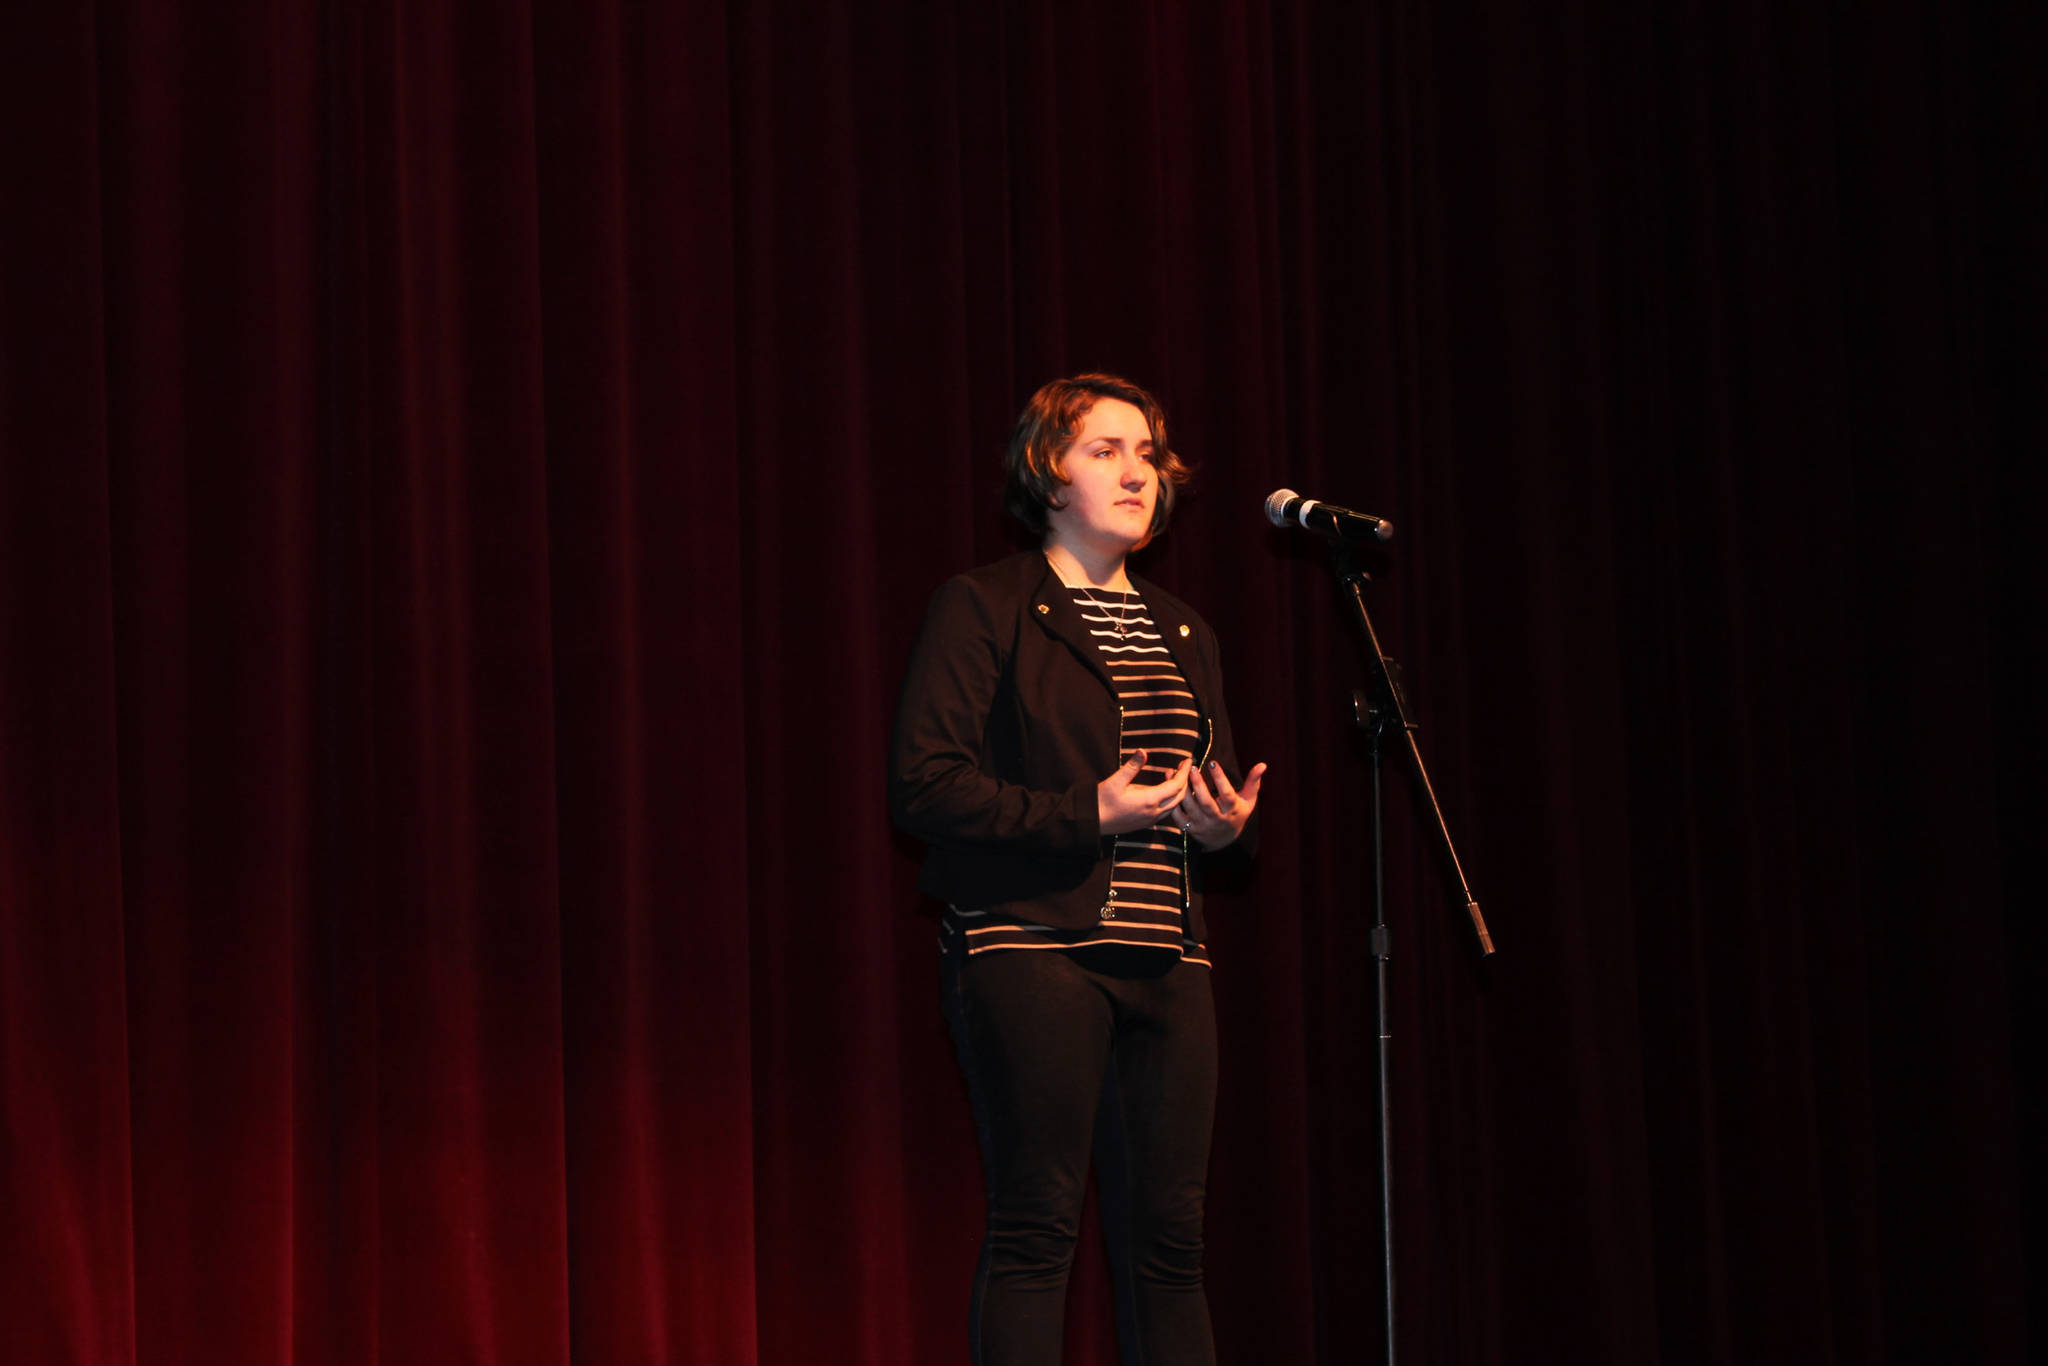 Homer High School student Iris Downey performs during a Poetry Out Loud event at the school Wednesday, Jan. 24, 2018 in Homer, Alaska. Held during the school’s Focused On Learning session, the competition is part of a national organization that teaches students memorization, recitation, public speaking skills and literary history. Poetry Out Loud has reached more than 3 million students and 50,000 teachers from every state, as well as Washington, DC, the US Virgin Islands and Puerto Rico, according to the organization’s website. (Photo courtesy Sean Campbell)